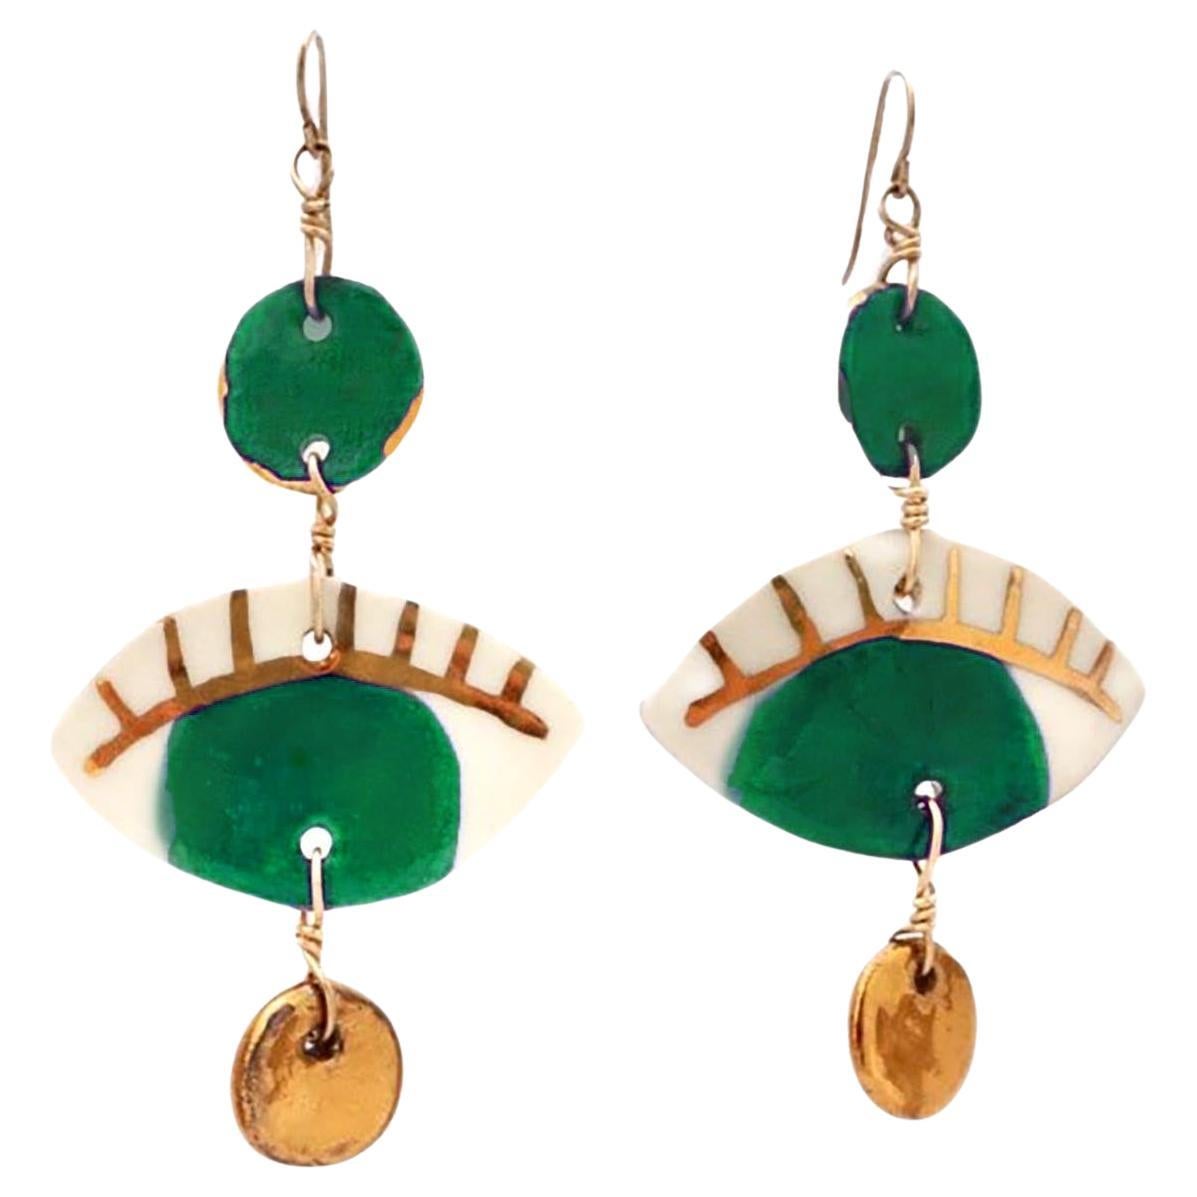 Forest Green Occhi Earrings - Handmade porcelain with 14k gold leaf detail For Sale